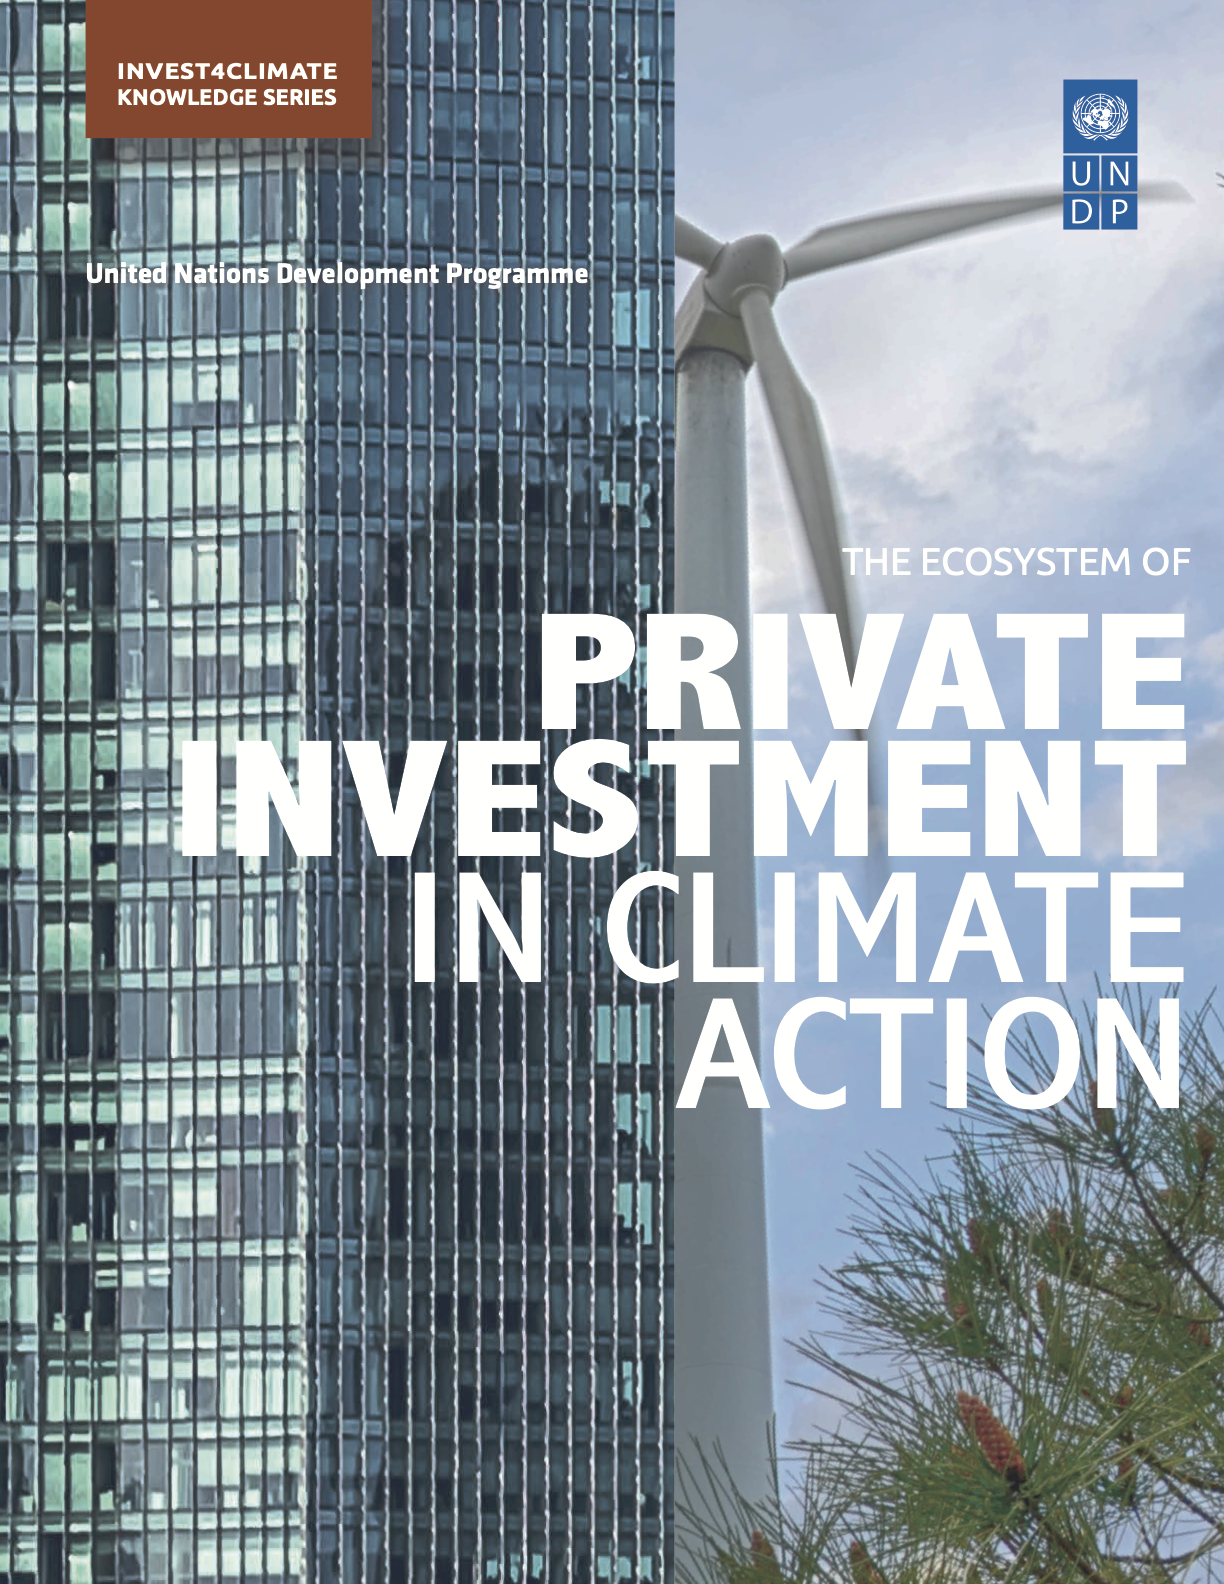 The Ecosystem of Private Investment in Climate Action